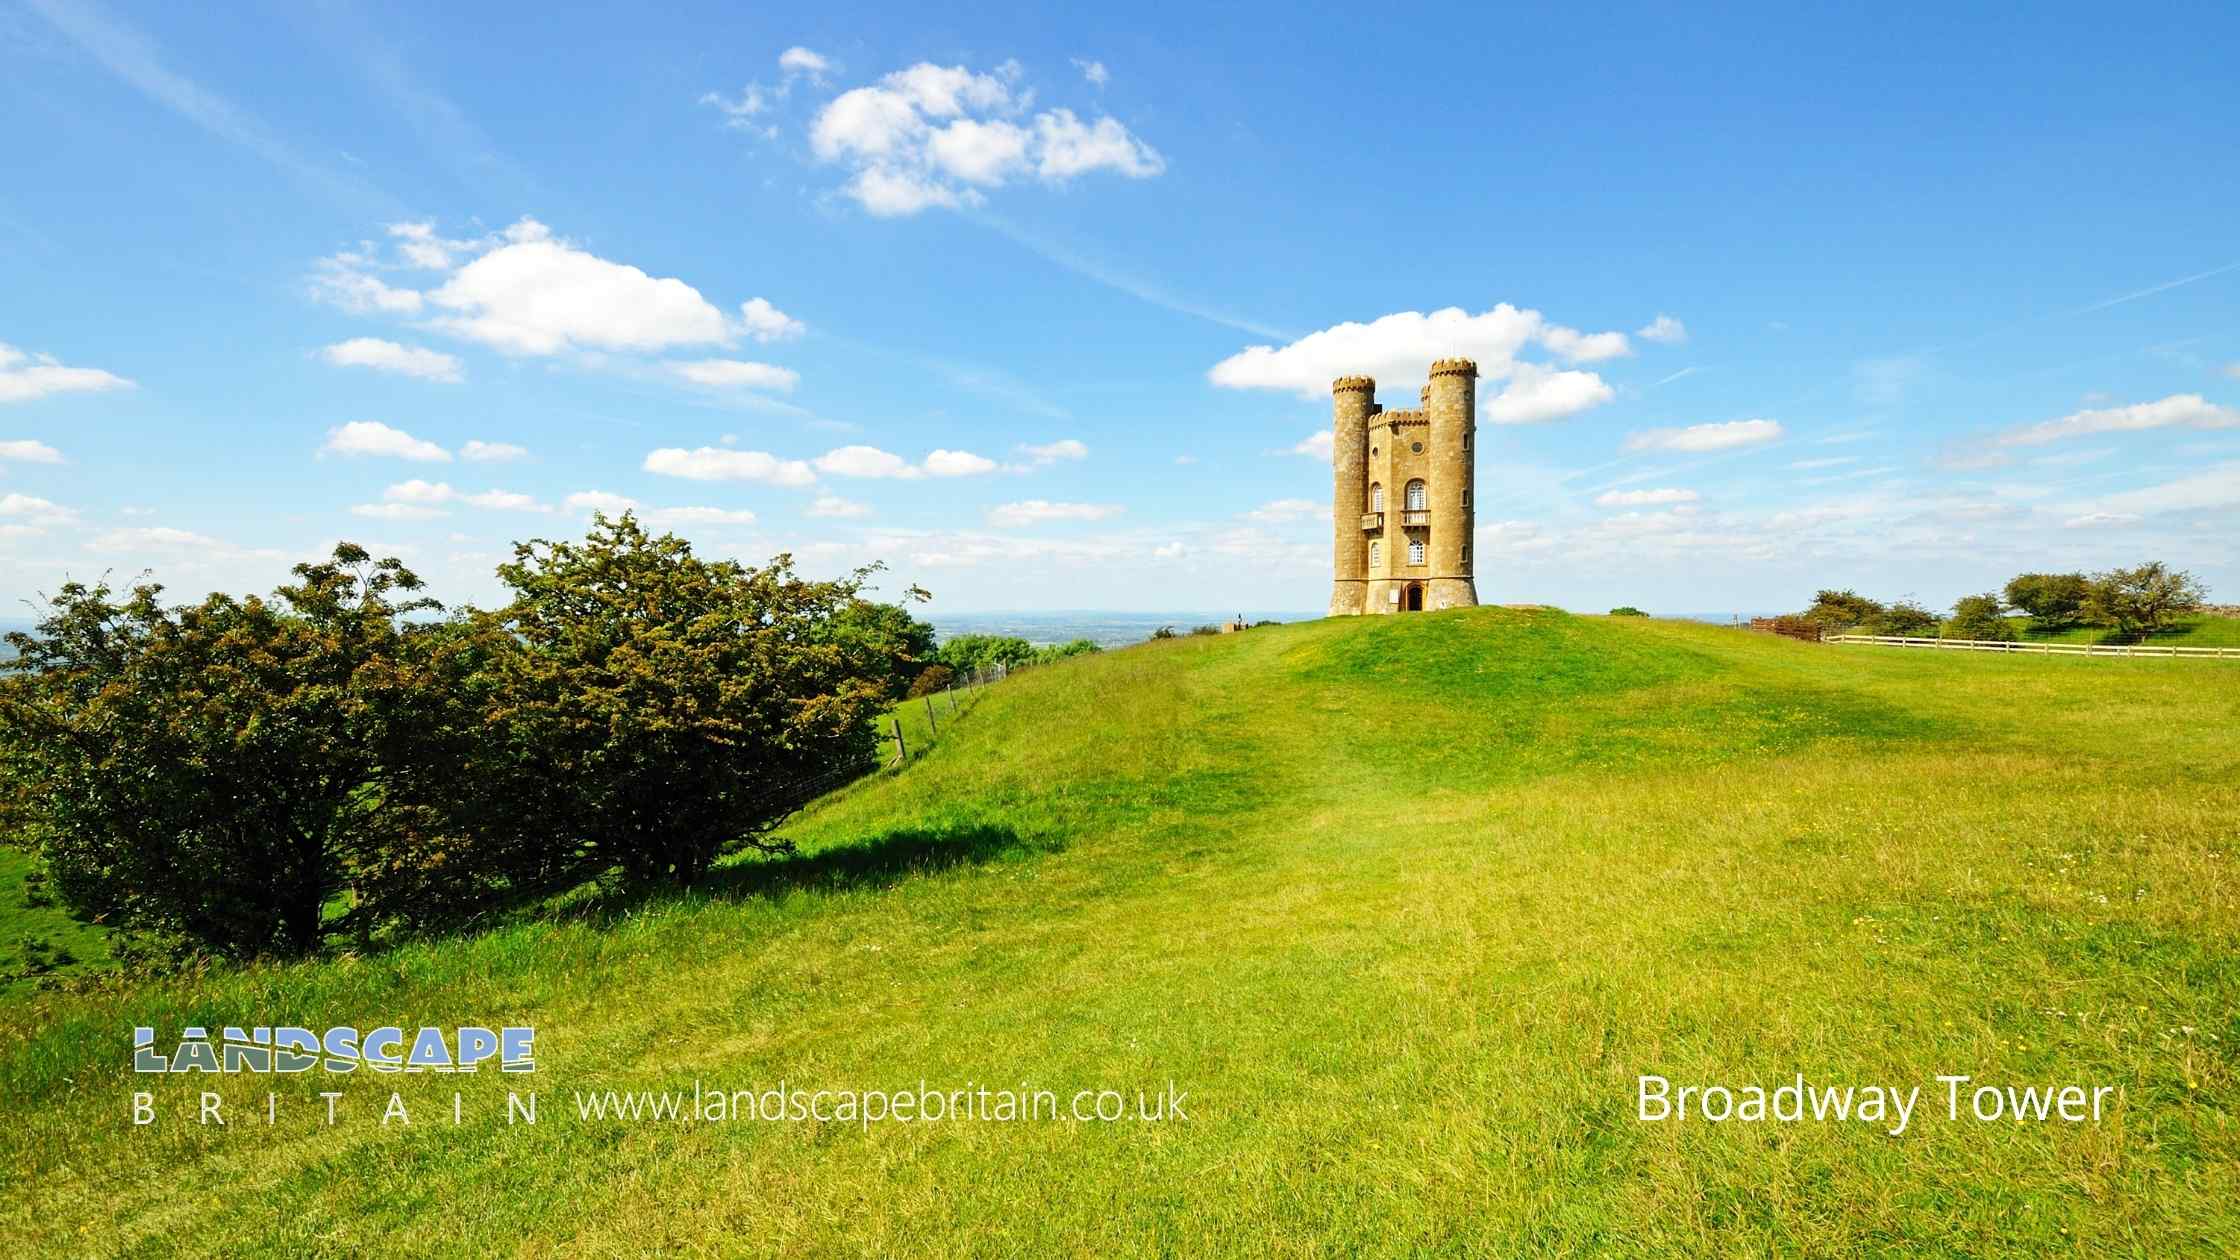 Historic Buildings in Broadway Tower Country Park